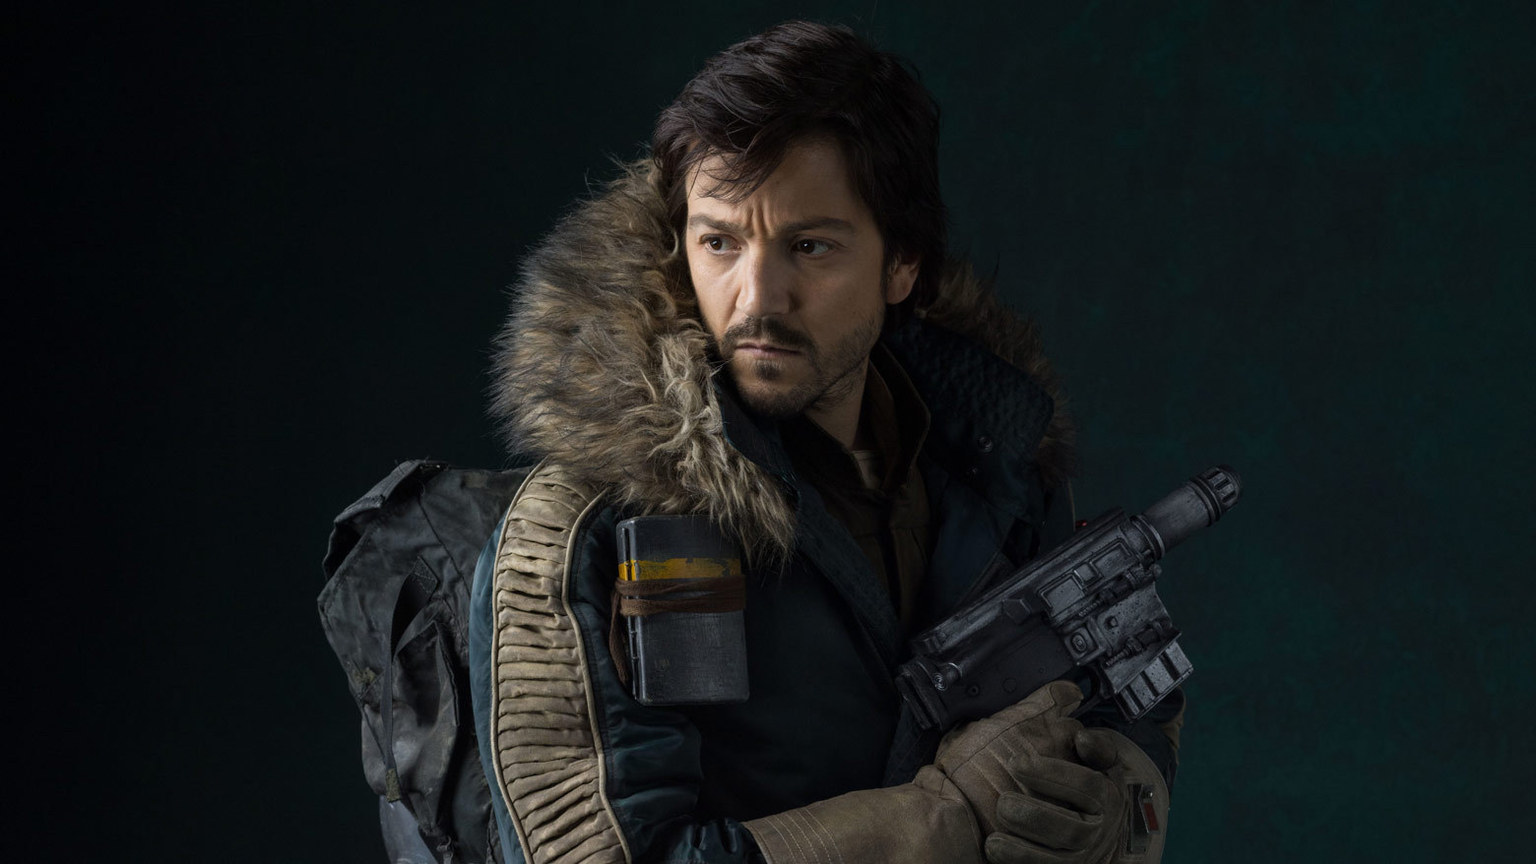 Diego Luna as Cassian Andor, Rogue One Star Wars :: Lucasfilm Ltd. All Rights Reserved